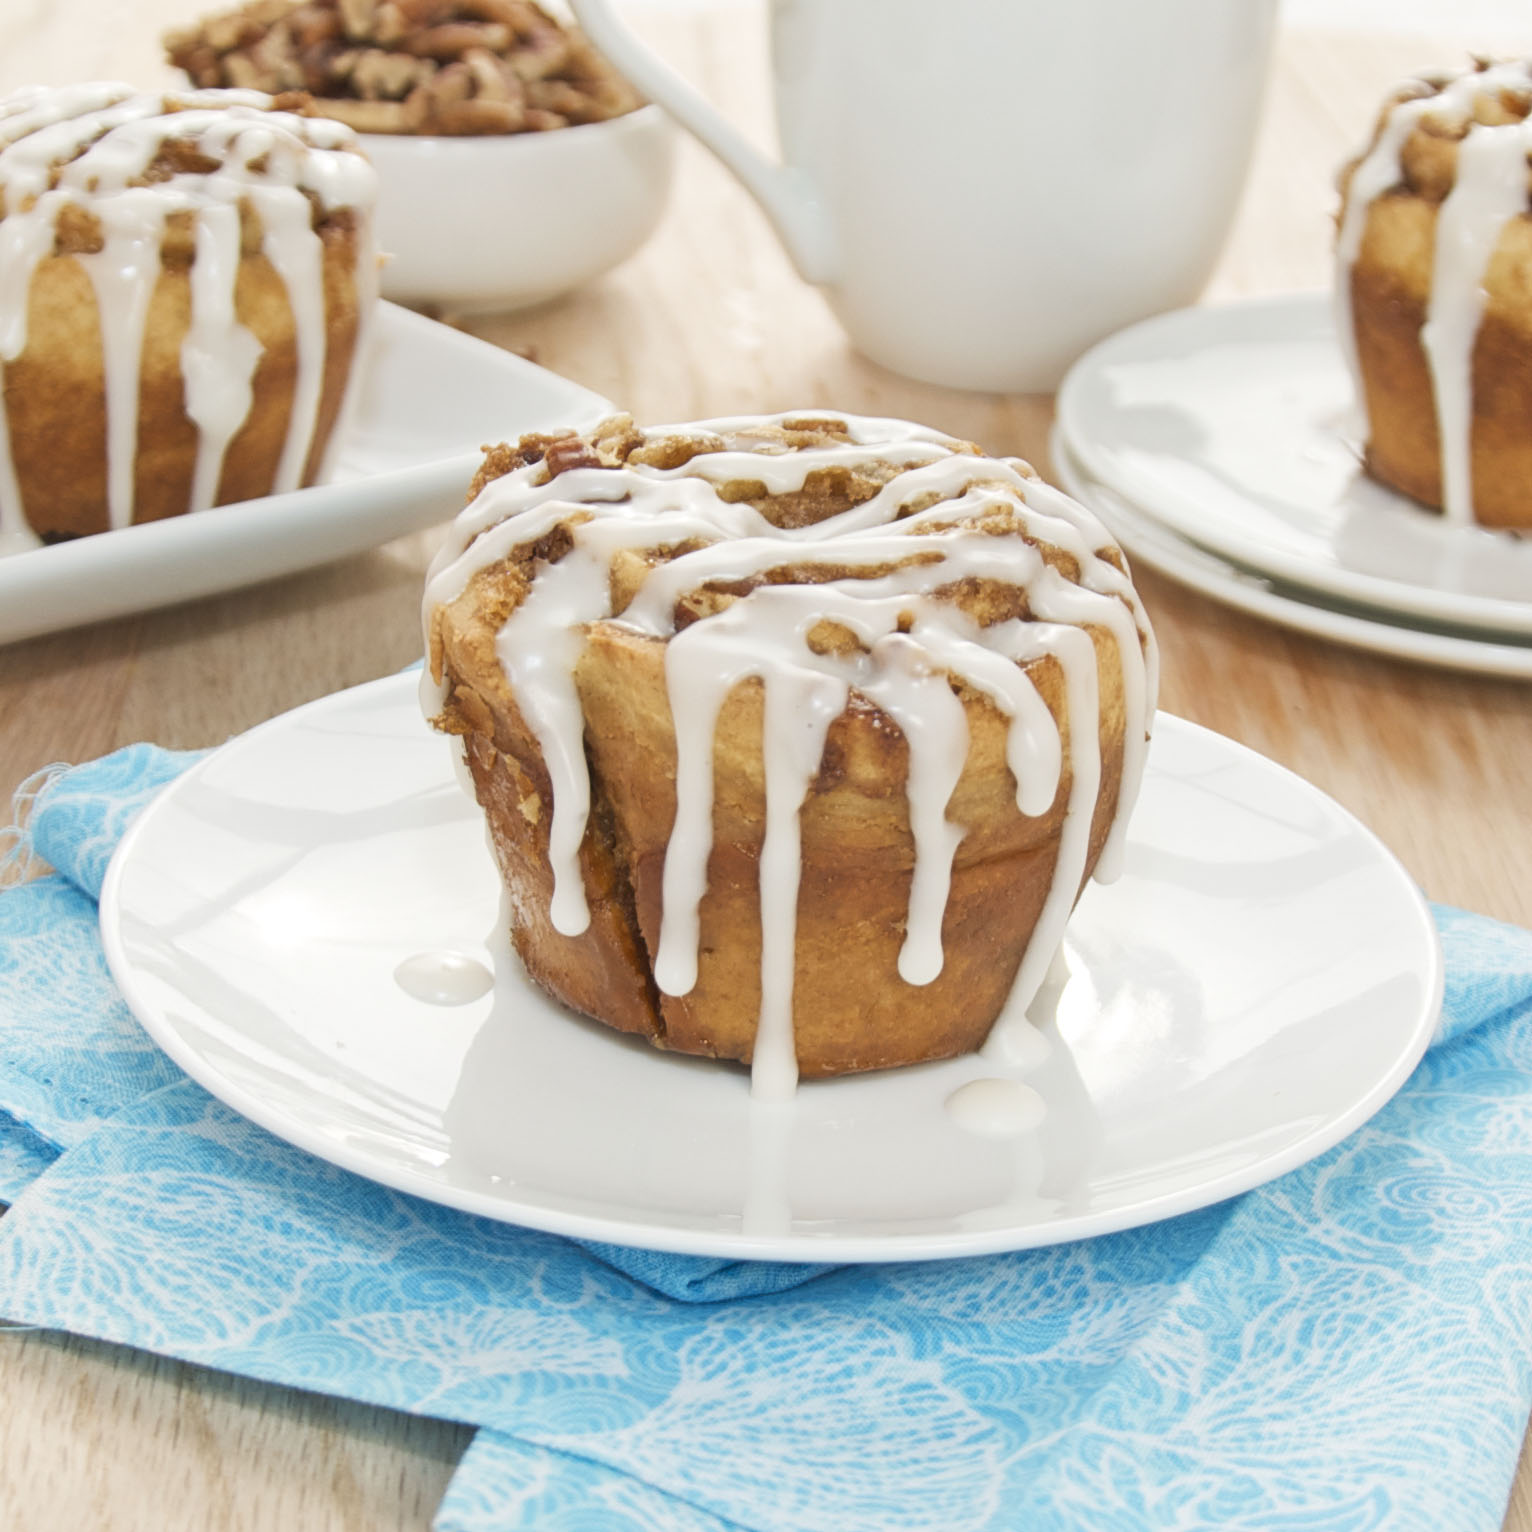 Popular Recipes and Cooking: Cinnamon Roll Muffins